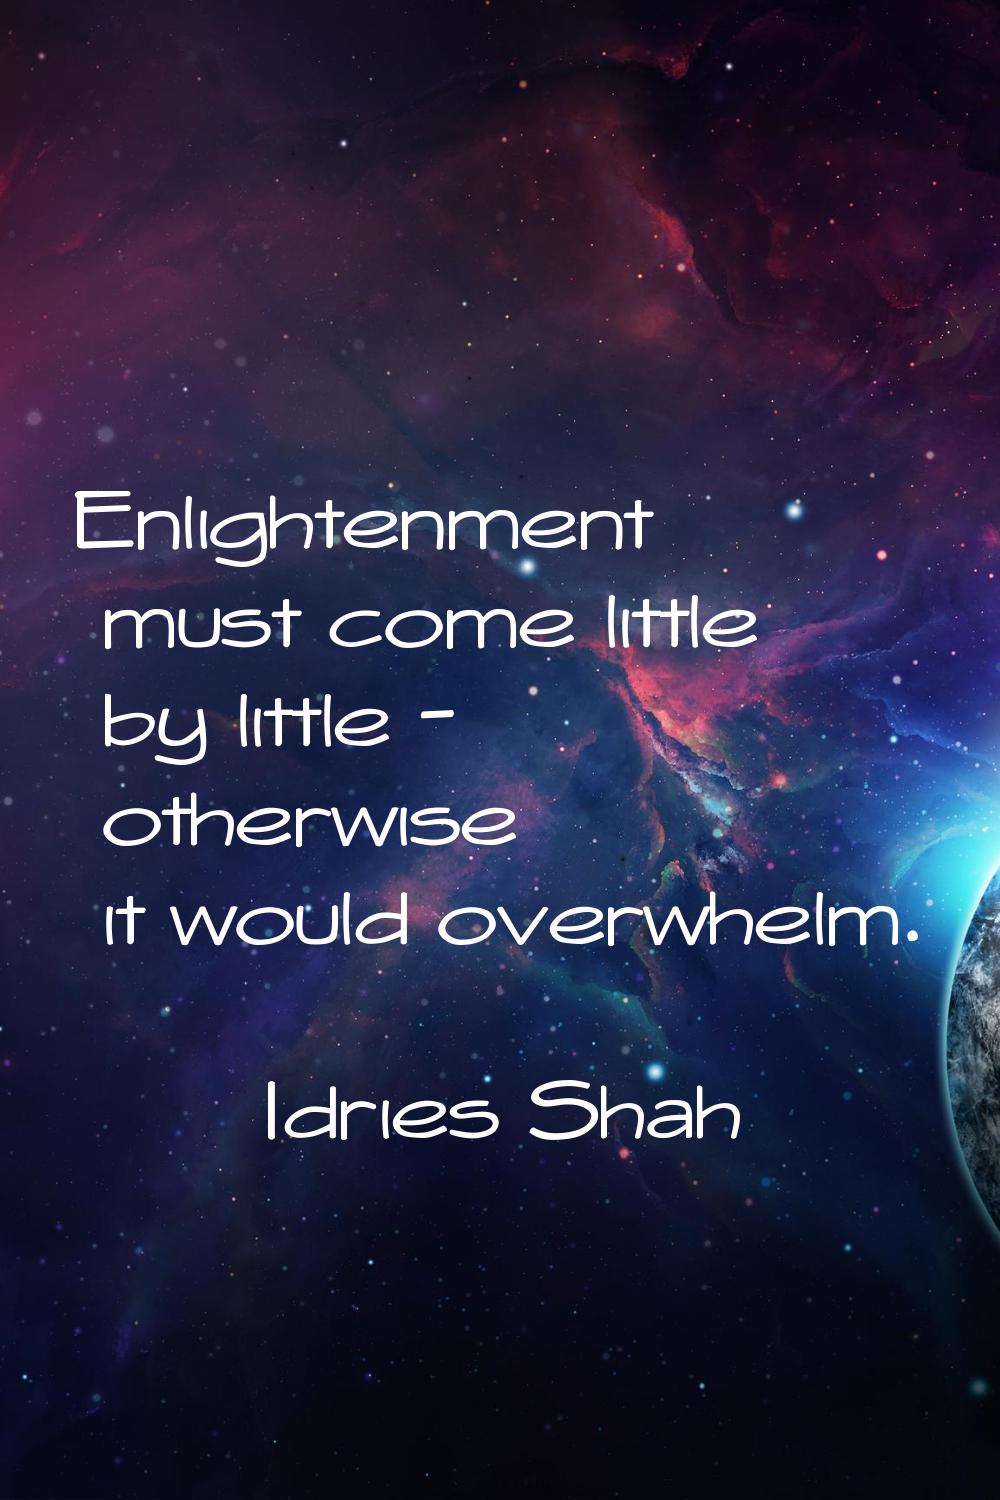 Enlightenment must come little by little - otherwise it would overwhelm.